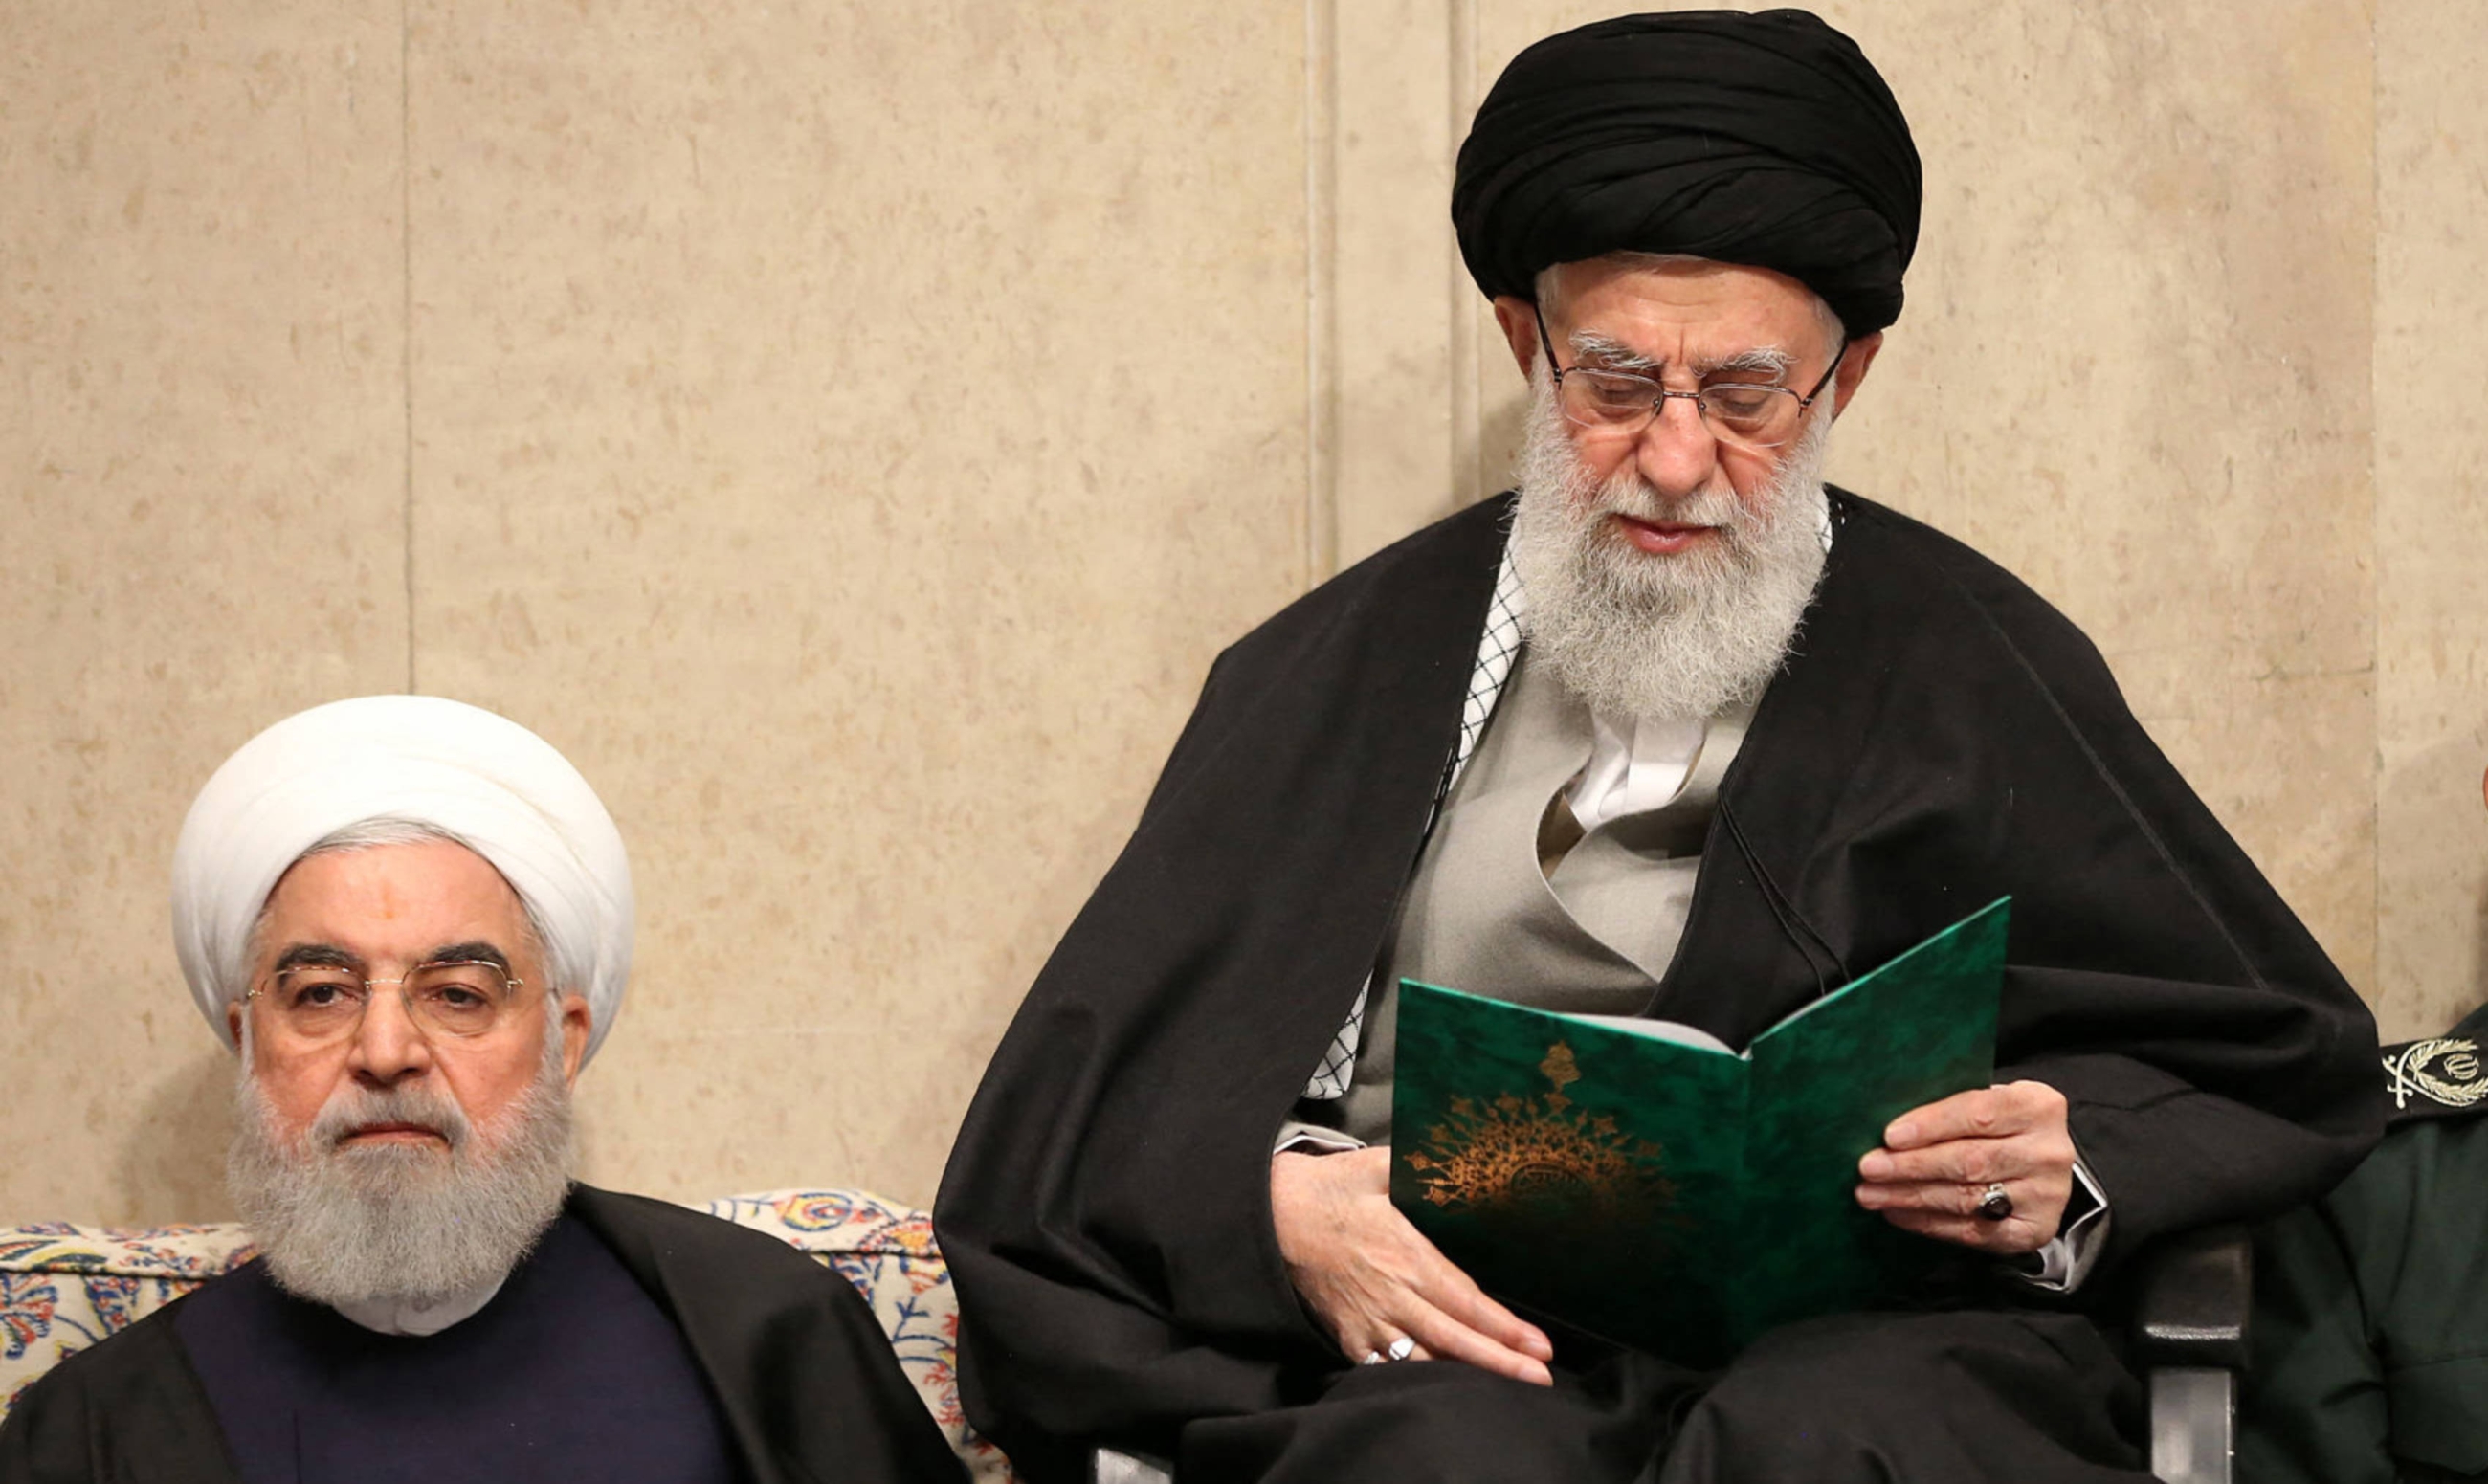 Iran's Supreme Leader Ayatollah Ali Khamenei (R) and then president Hassan Rouhani pictured during a mourning ceremony in Tehran for slain top general Qasem Soleimani, 9 January 2020 (AFP)